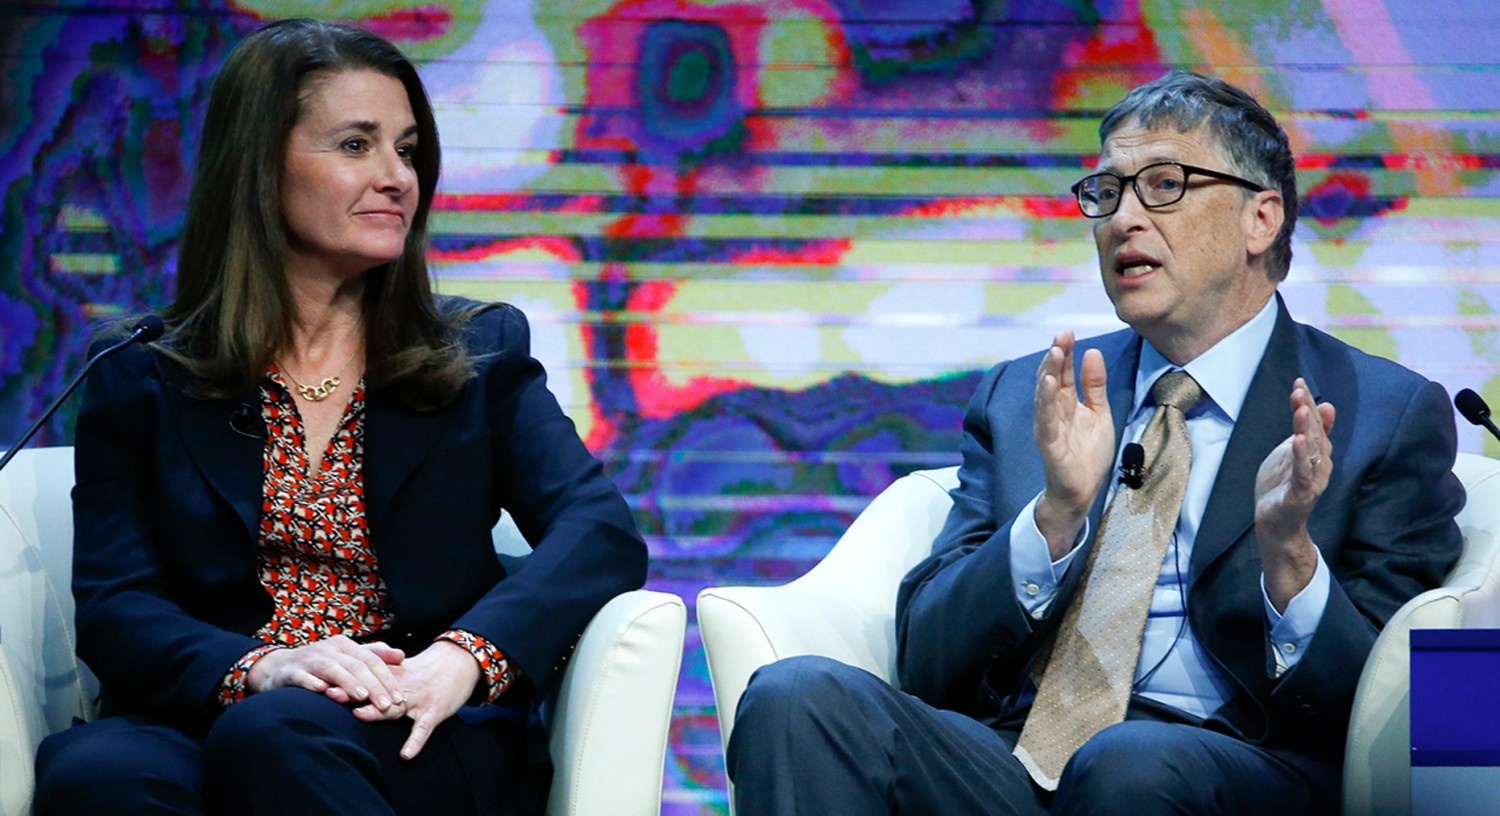 Bill Gates, co-chair of the Bill & Melinda Gates Foundation gestures next to his wife Melinda French Gates during the session "Sustainable Development: A Vision for the Future" in the Swiss mountain resort of Davos January 23, 2015.